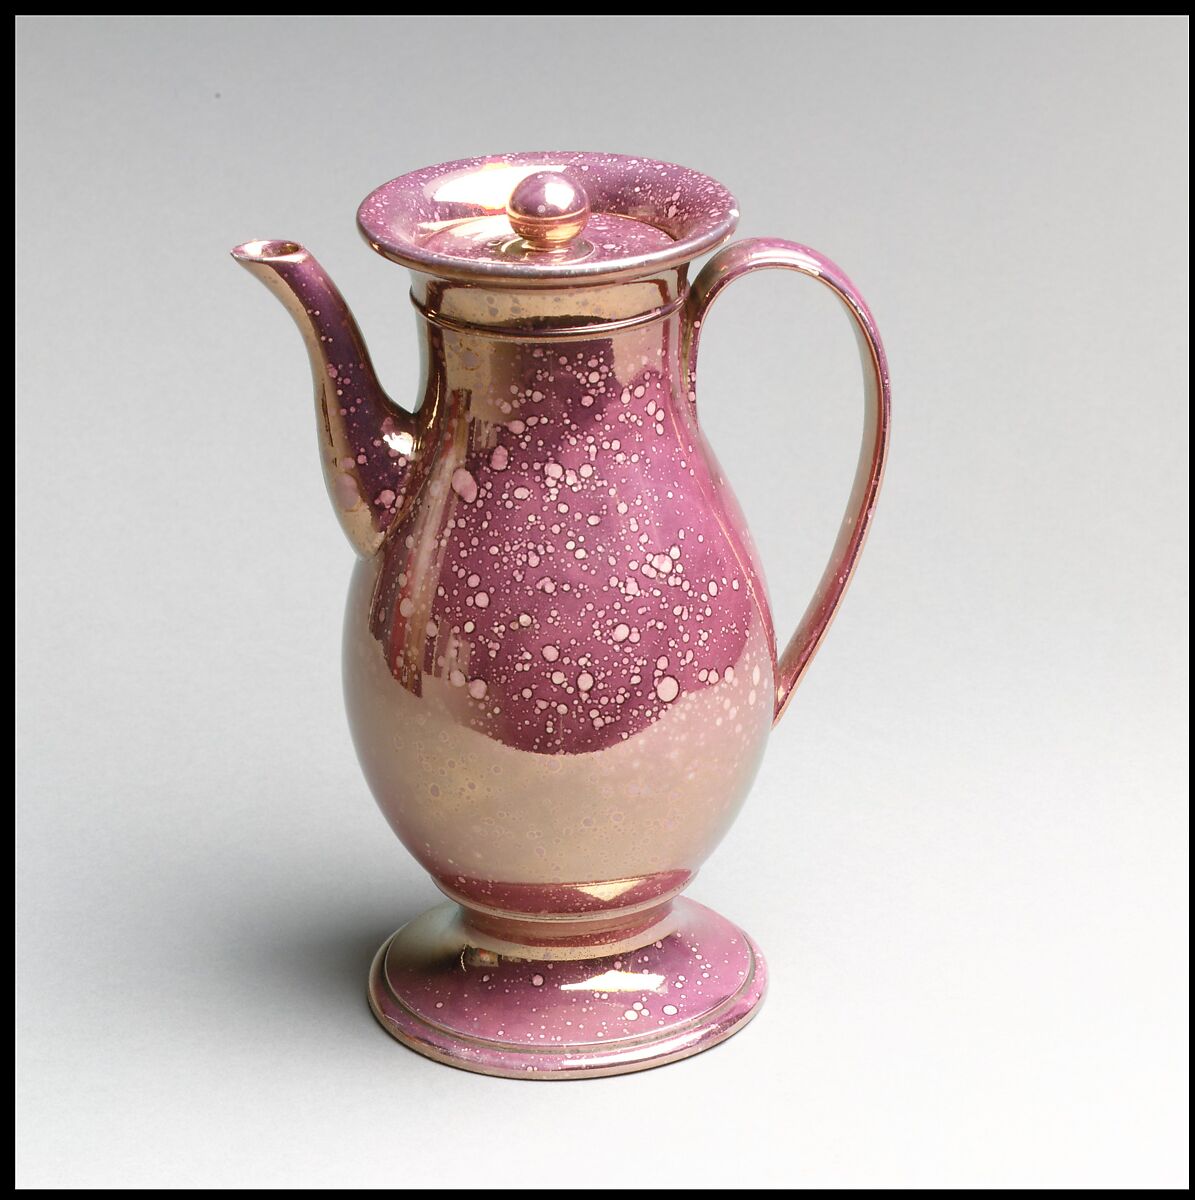 Coffeepot (part of a set), Lustreware, French, Sarreguemines 